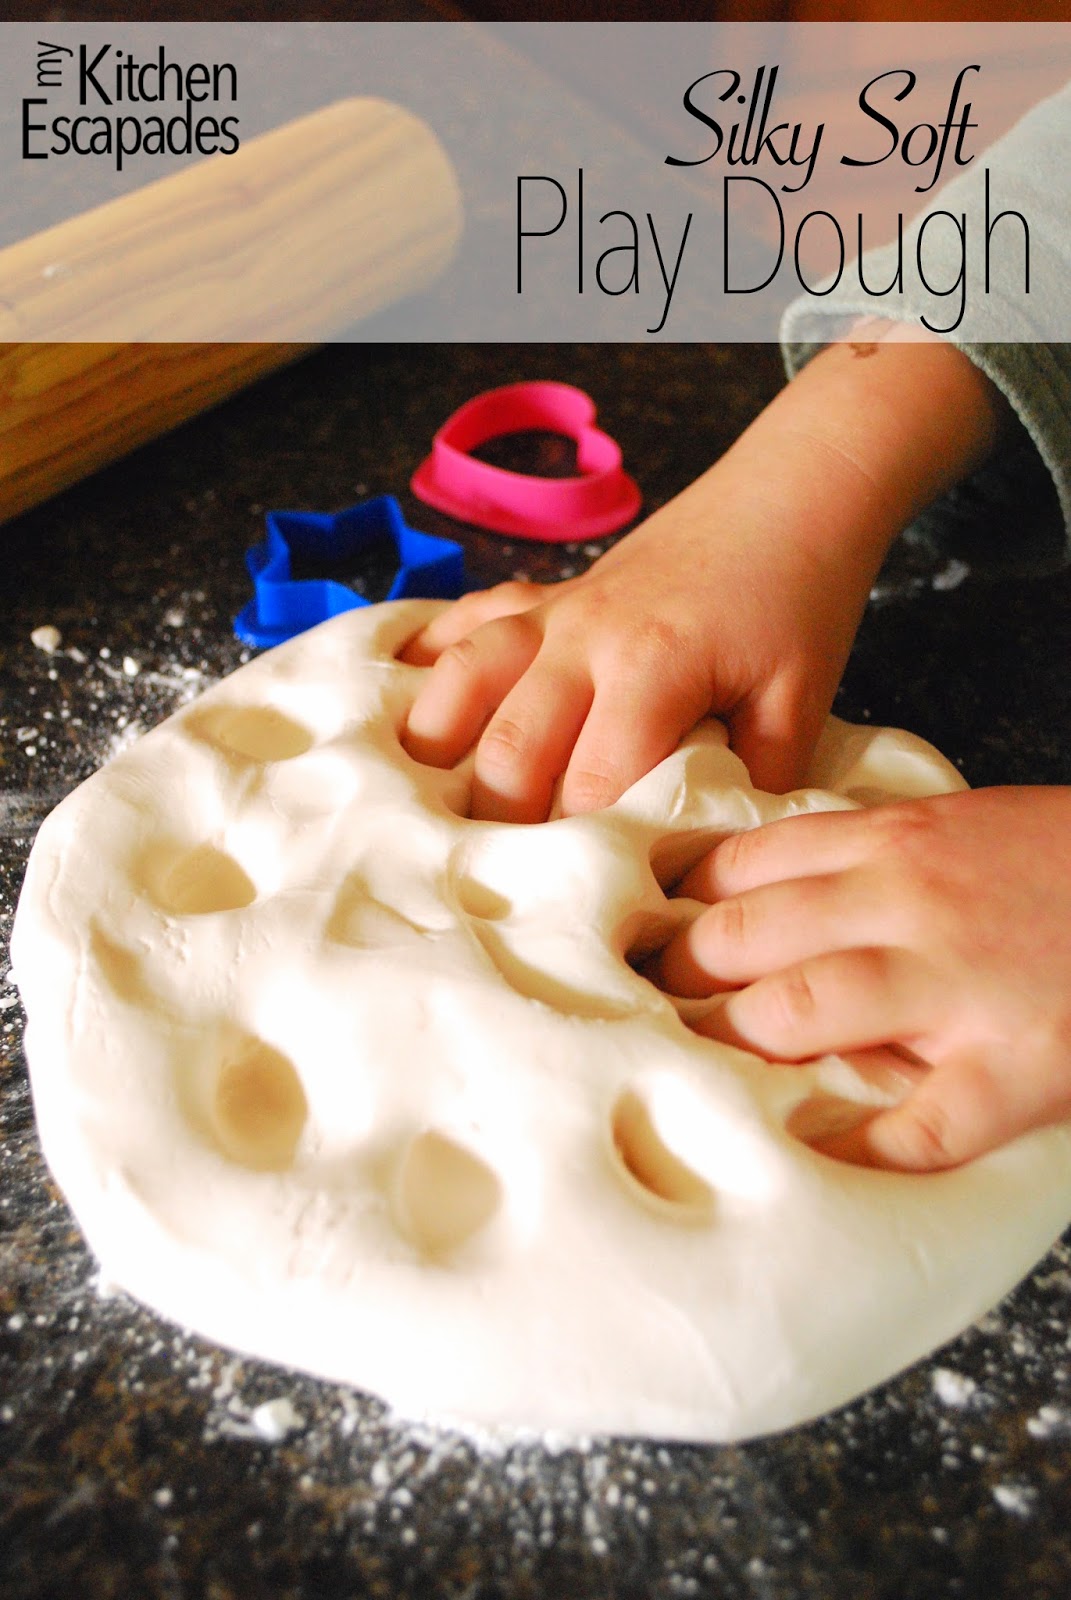 Make silky soft play dough with only two ingredients. Your kids will love it. It's a perfect activity to try during summer!